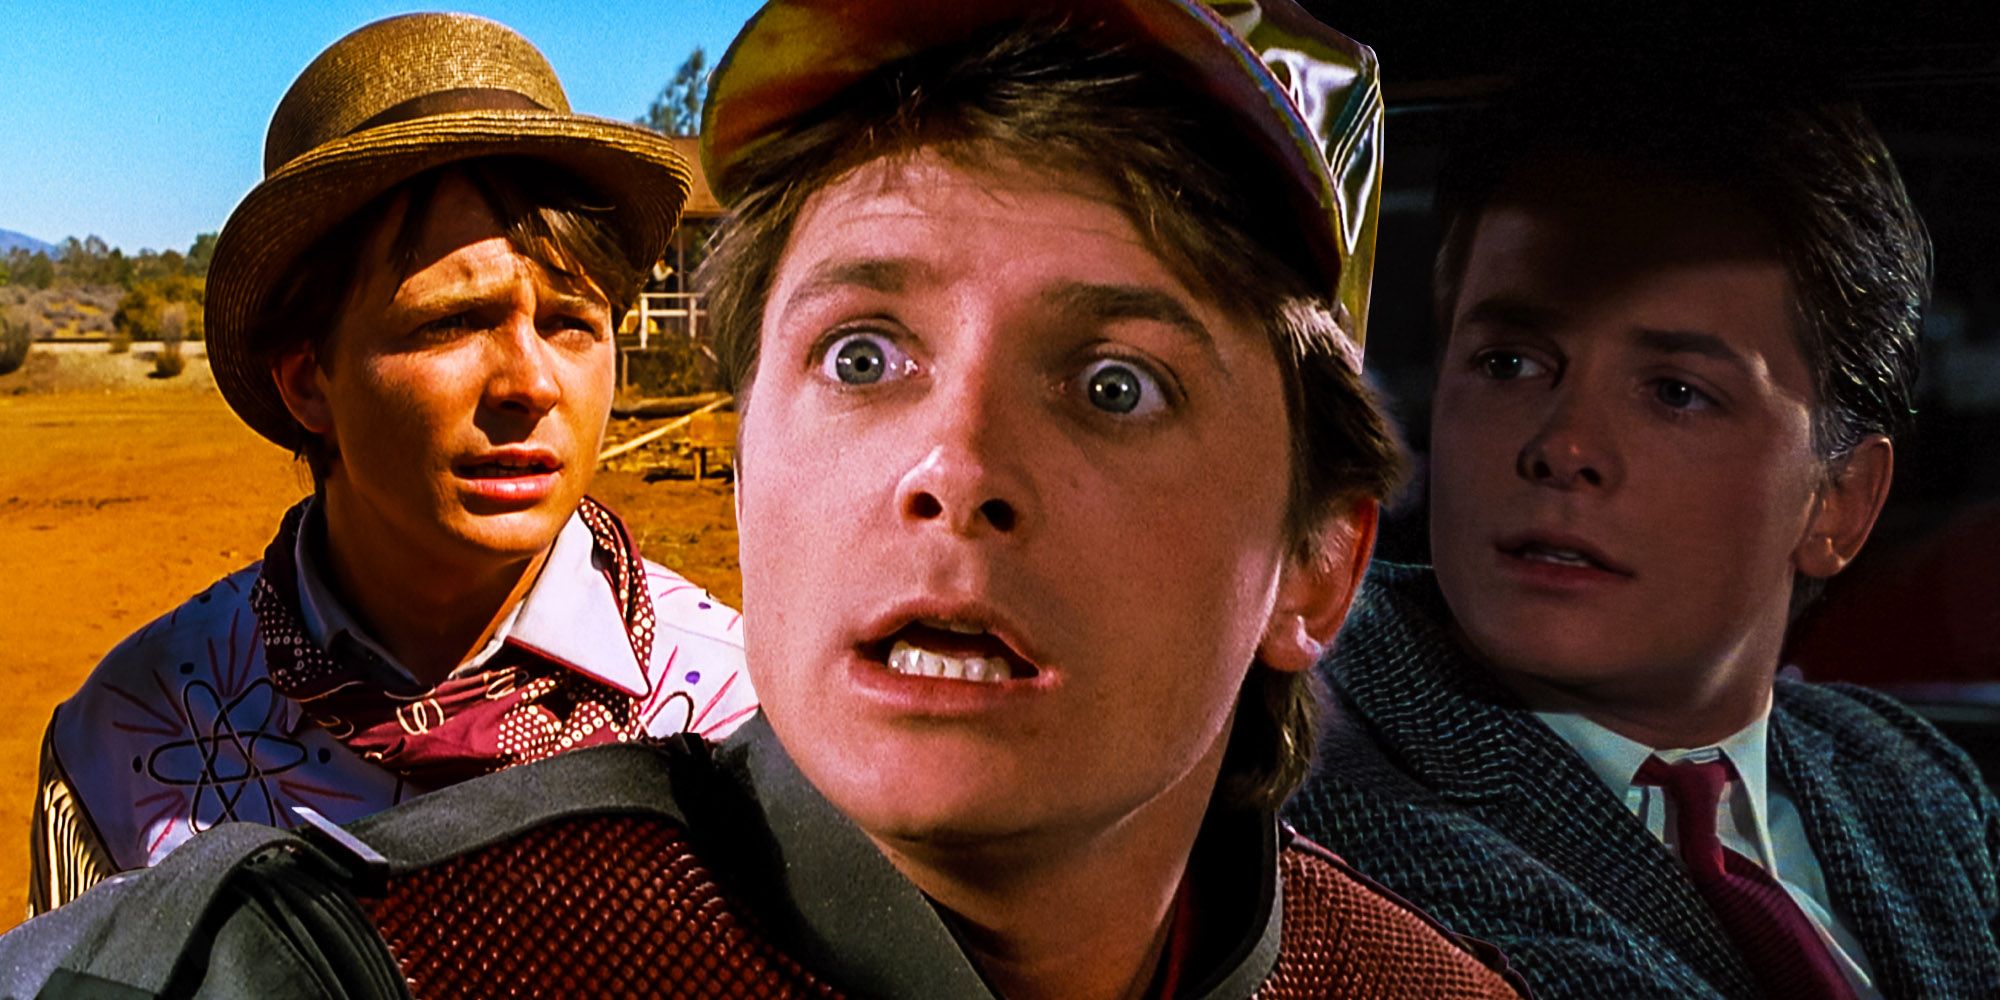 Michael J fox Marty Mcfly Back to the future part 2 part 3